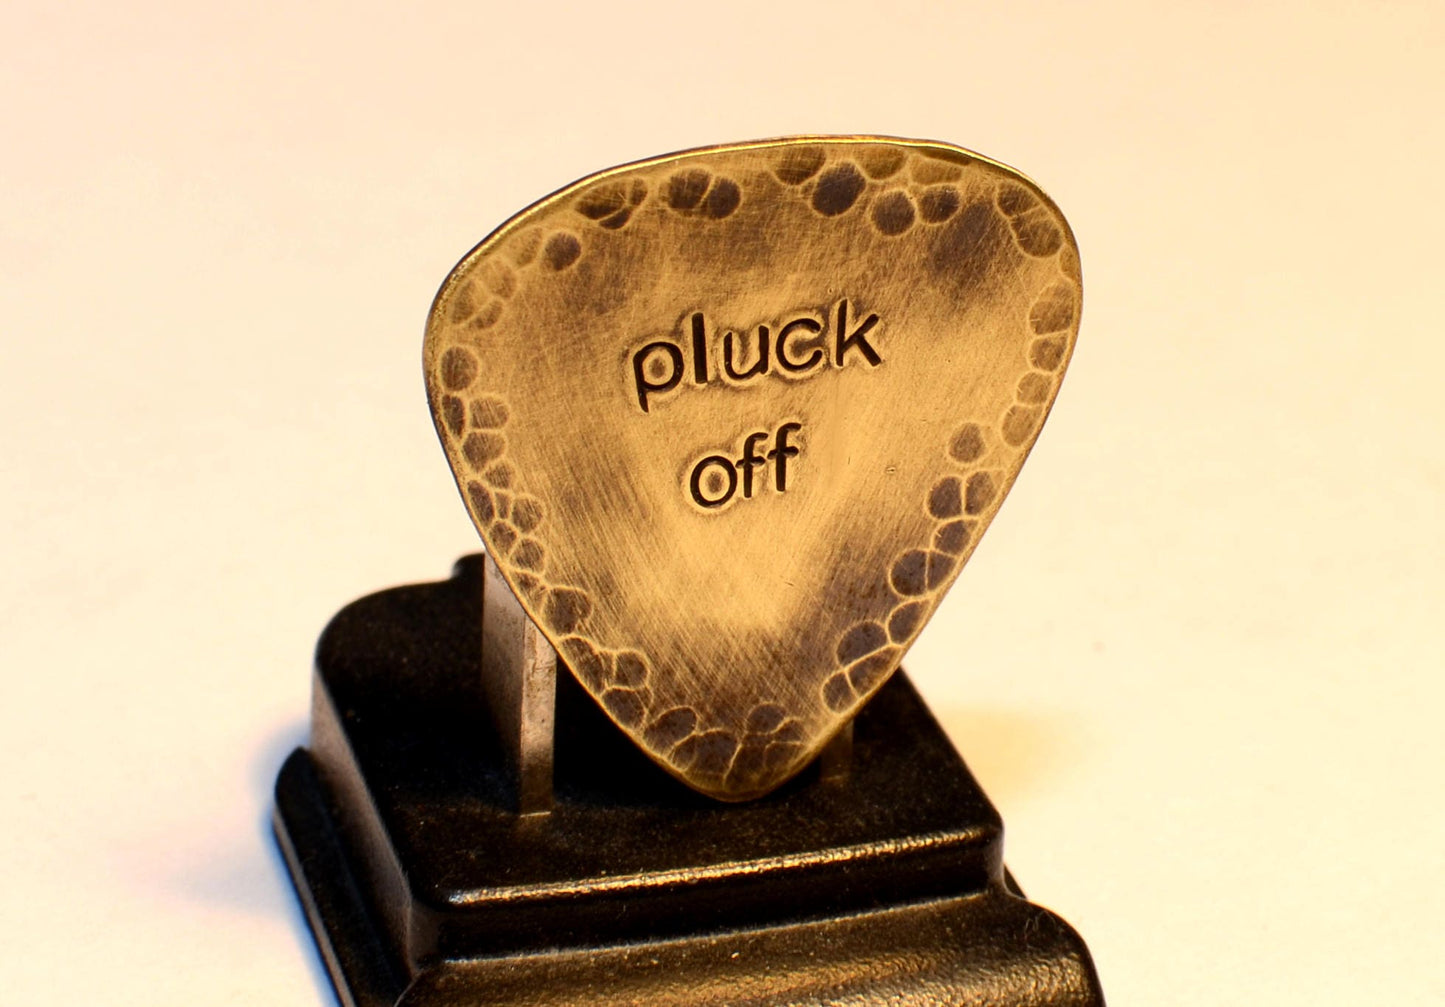 Pluck Off Brass Guitar Pick with Rustic Patina and Hammered Patterning